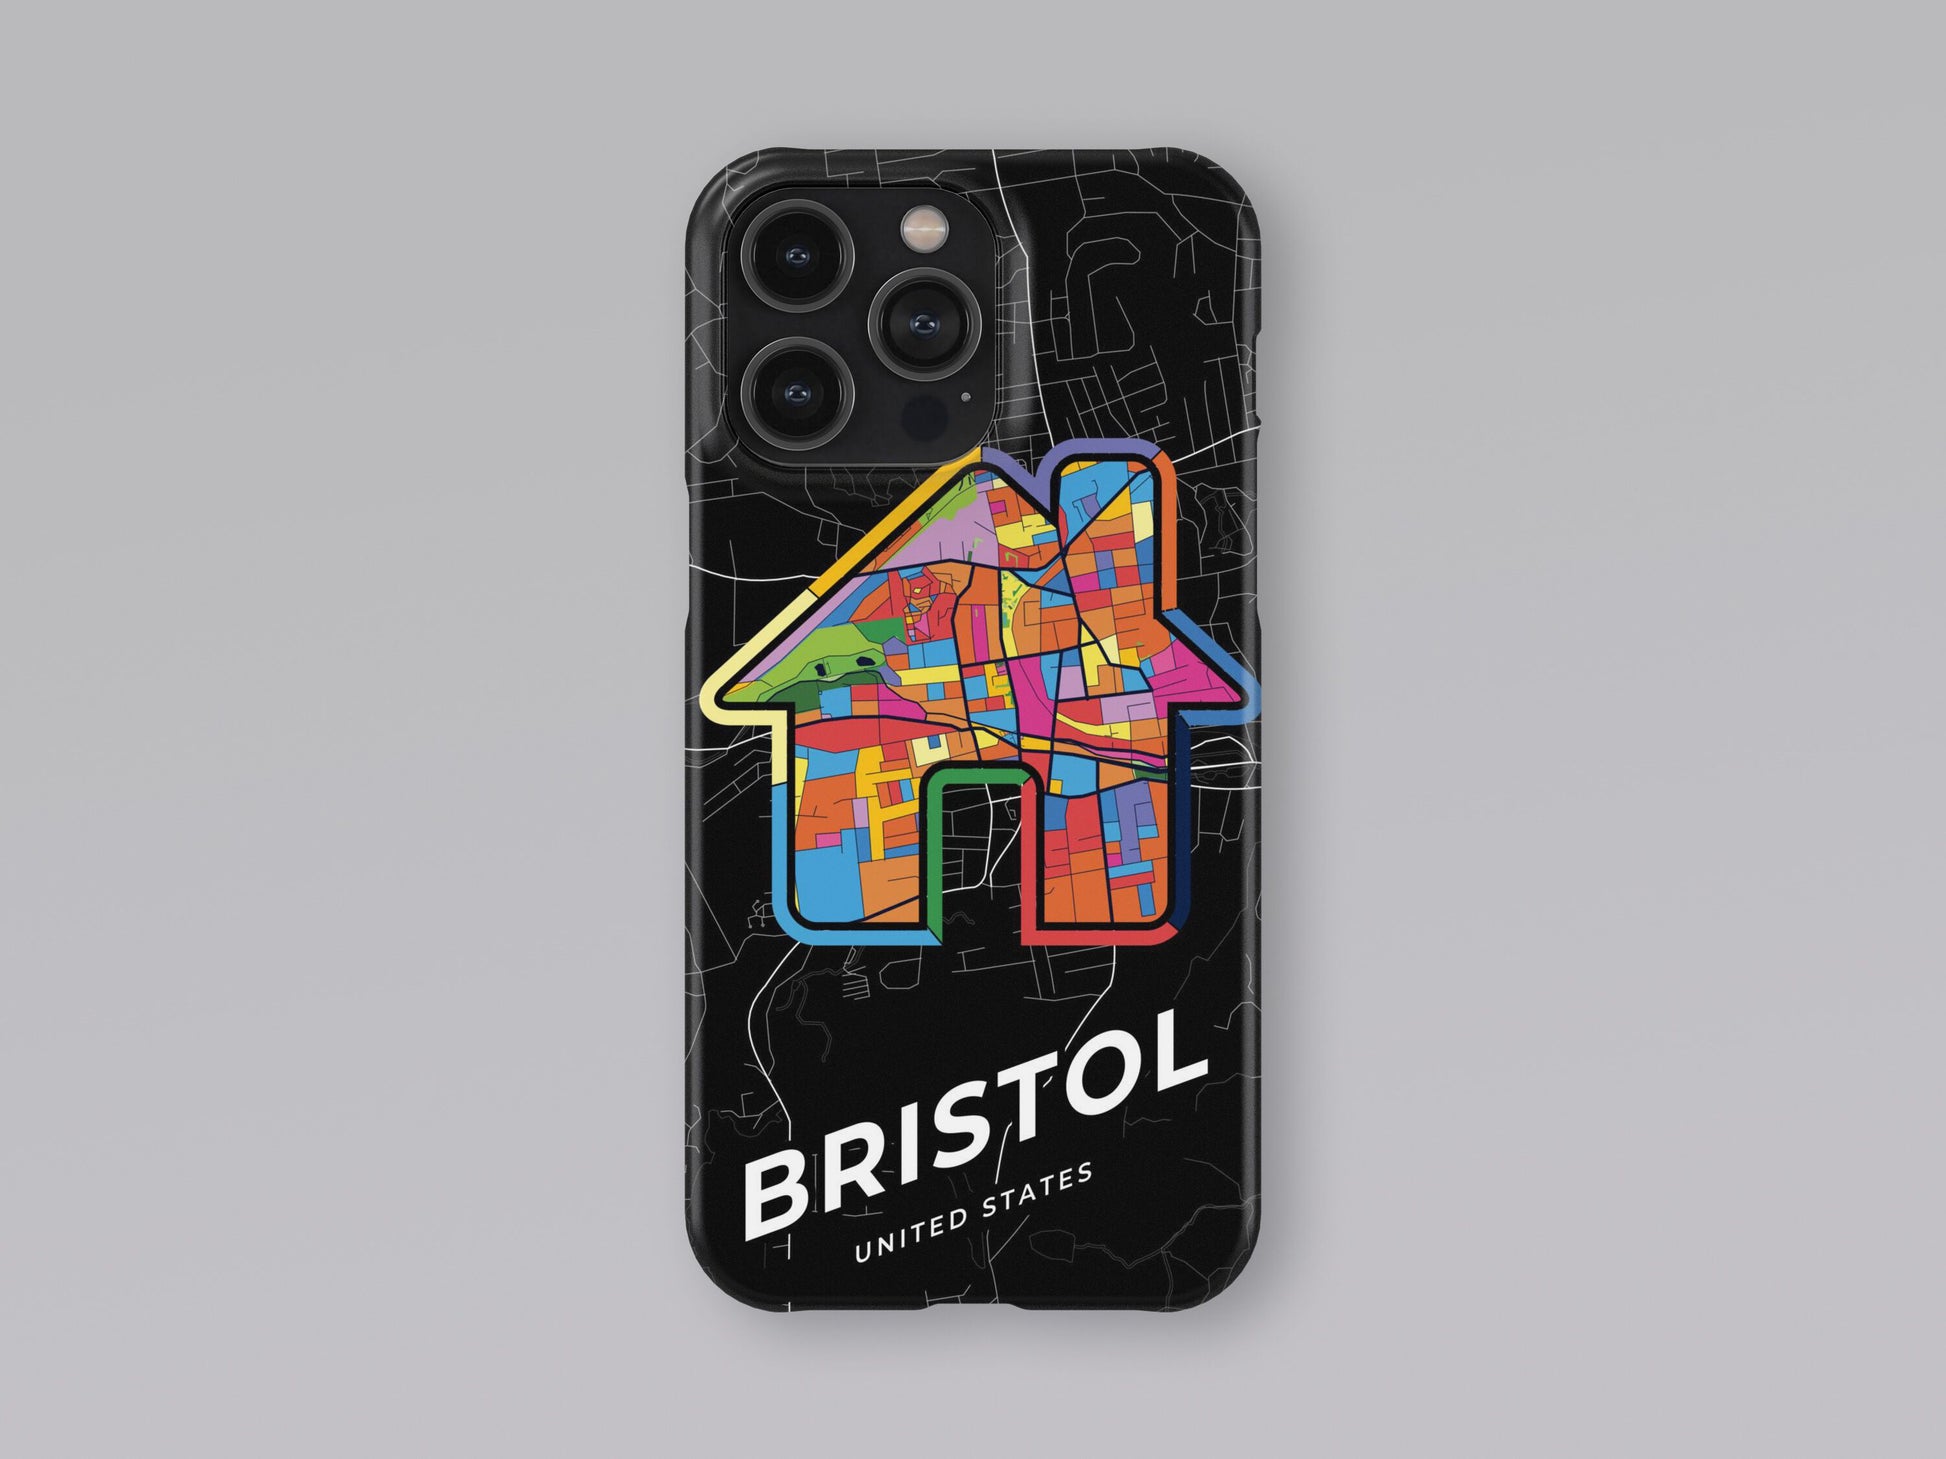 Bristol Connecticut slim phone case with colorful icon. Birthday, wedding or housewarming gift. Couple match cases. 3